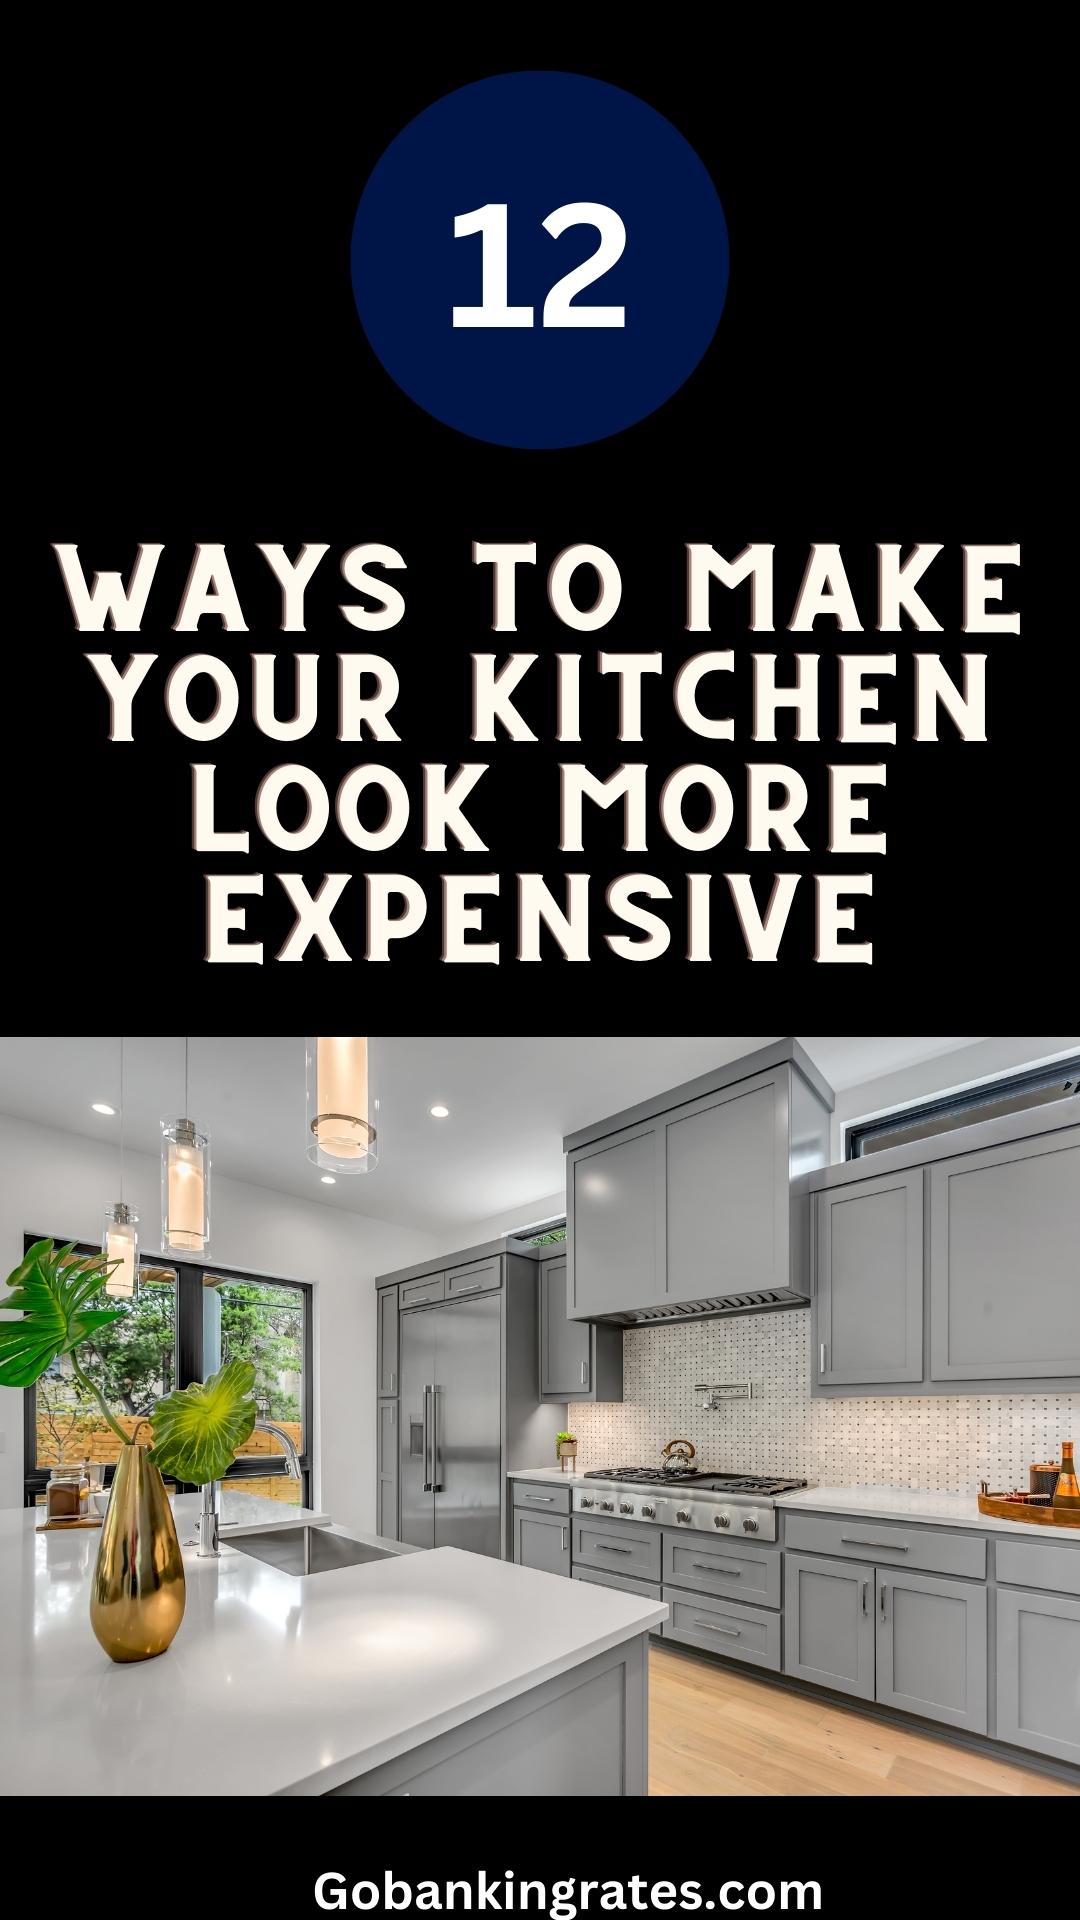 How to Make Your Kitchen Look Expensive | Visual.ly